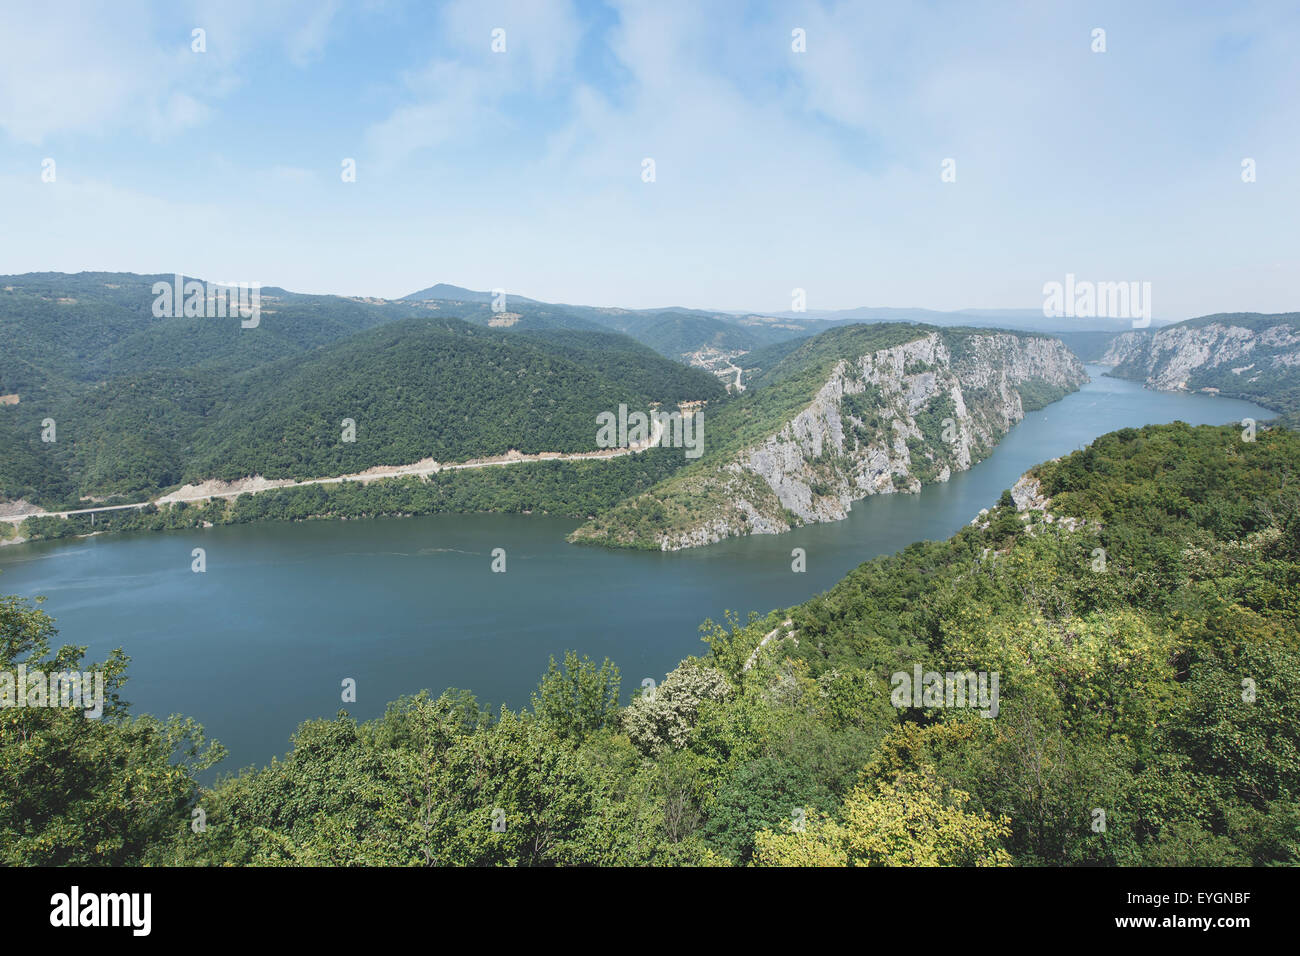 The Iron Gate of the Danube. Landscape in the Danube Gorges Stock Photo